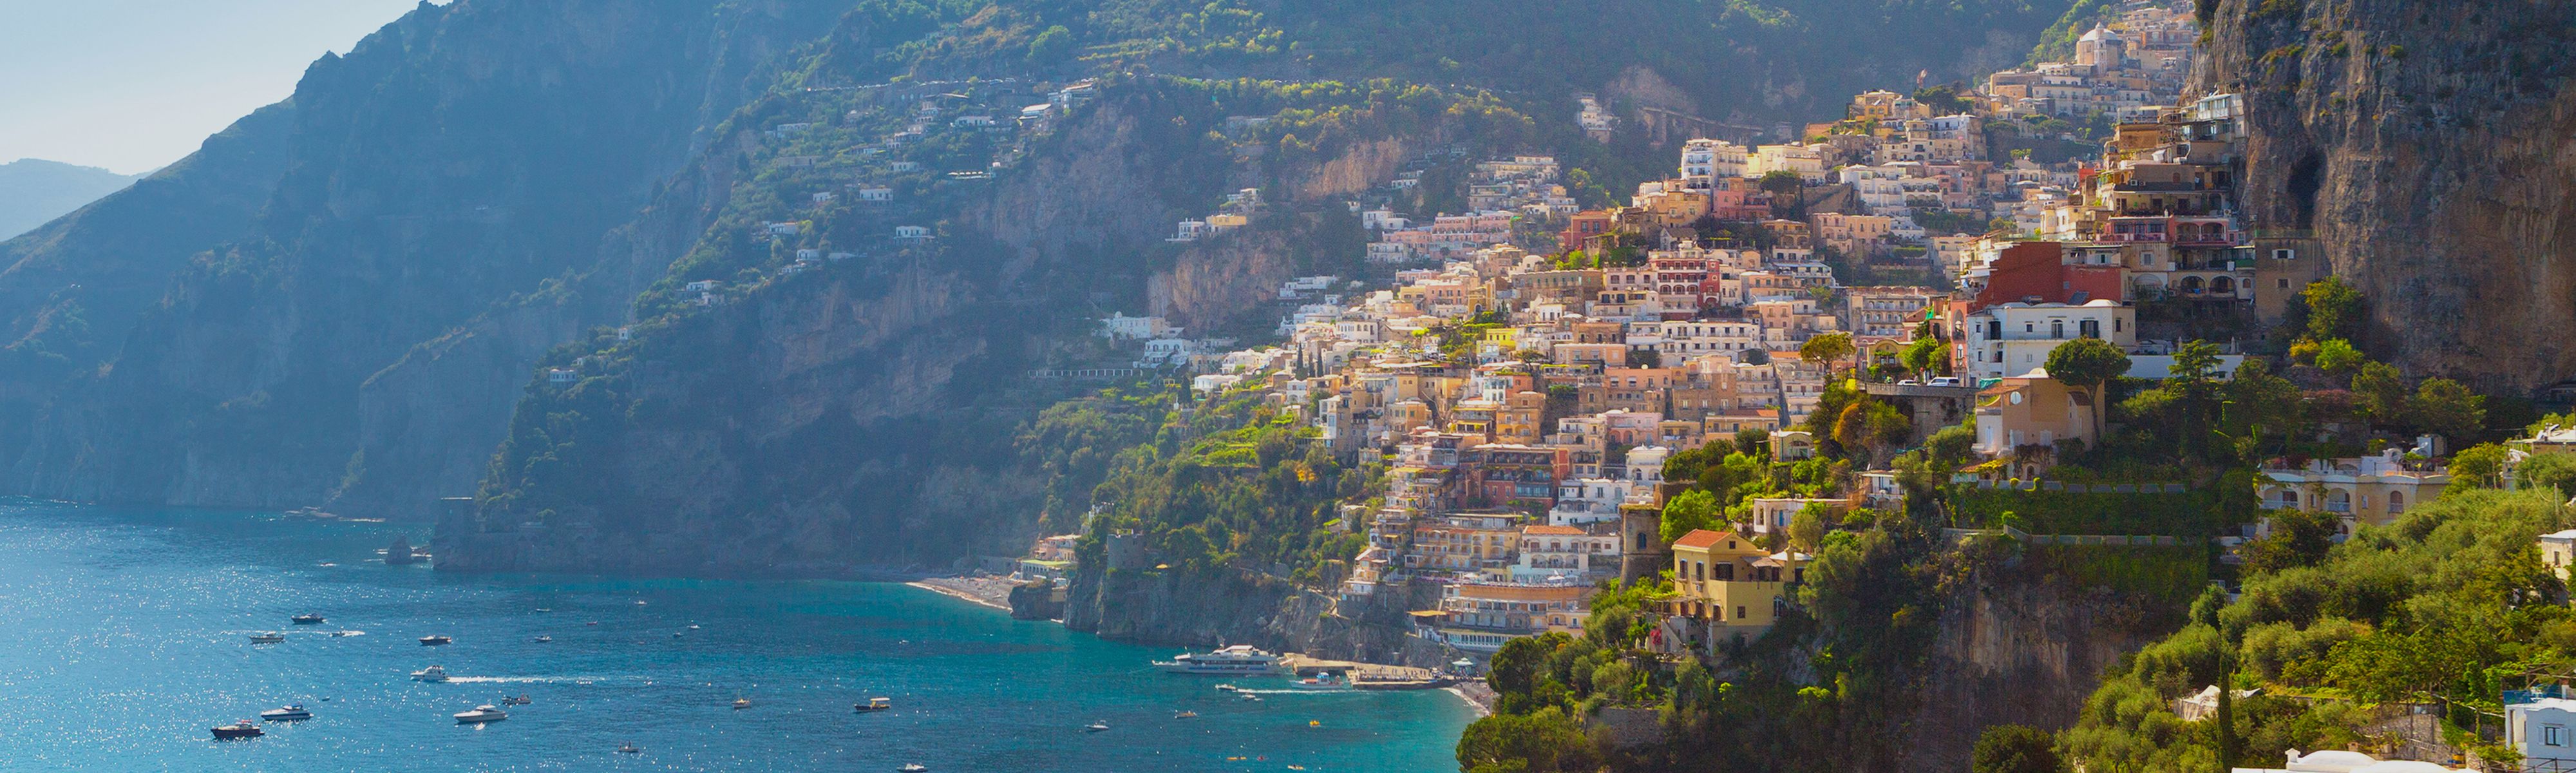 yellow and tan houses along the cliffs of the amalfi coast in italy